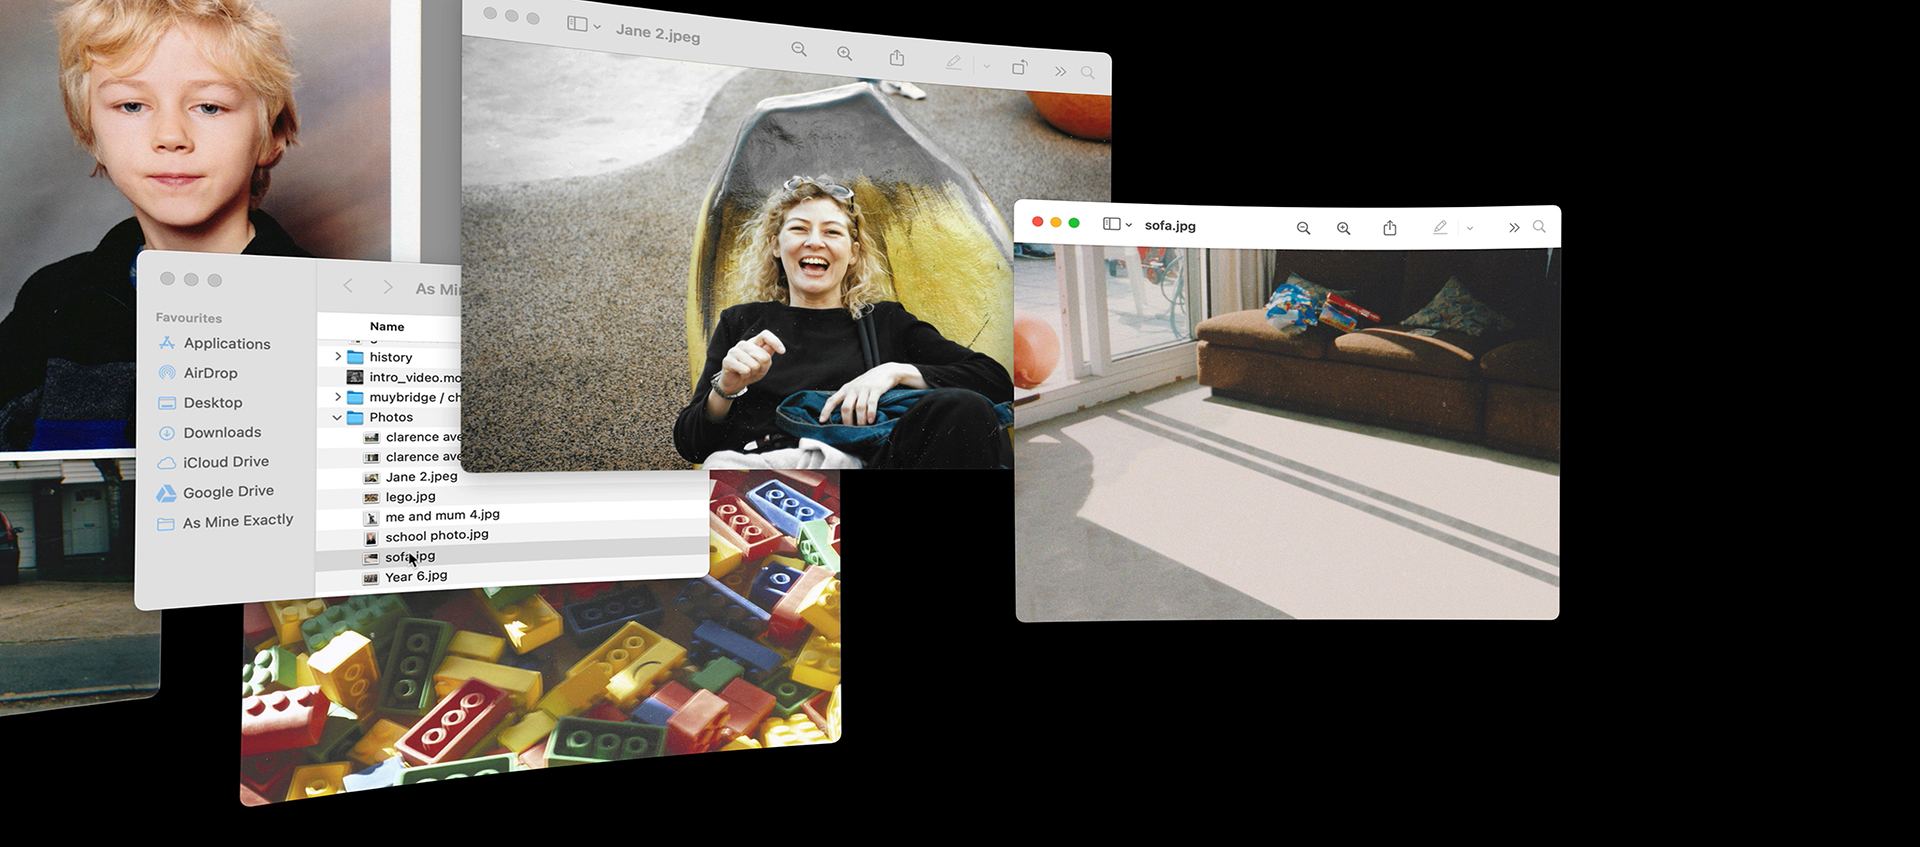 Five separate images of computer screens, one features a young blond boy, one is a list of files in a computer folder, one is a pile of colorful lego bricks, one is a woman with blonde curly hair leaning on her back and laughing, the final image is a living room with sunlight pouring through a sliding door window